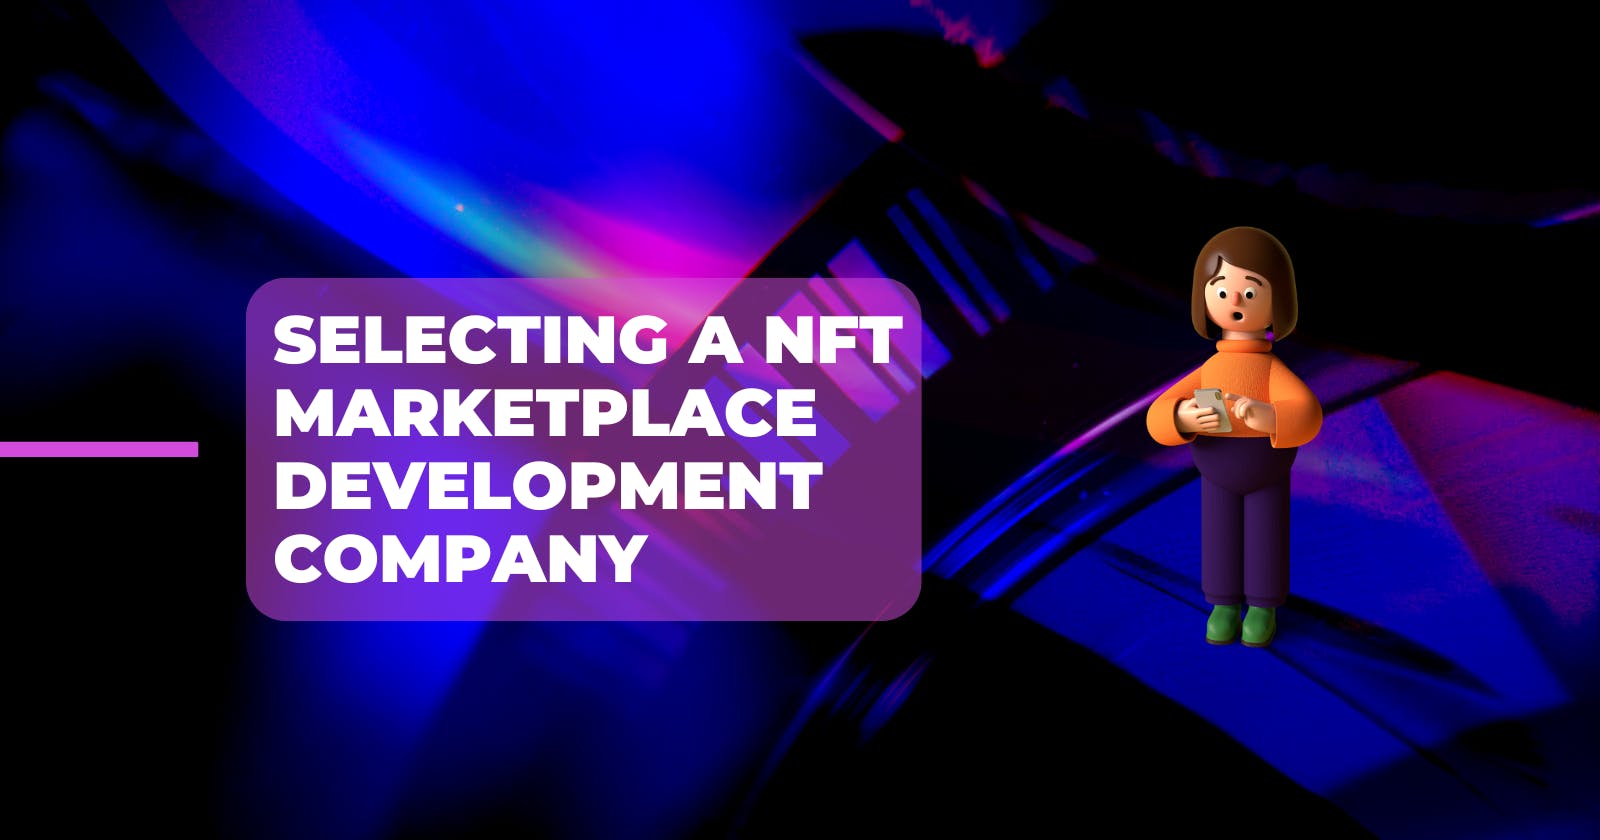 Key Factors to Consider When Selecting a NFT Marketplace Development Company